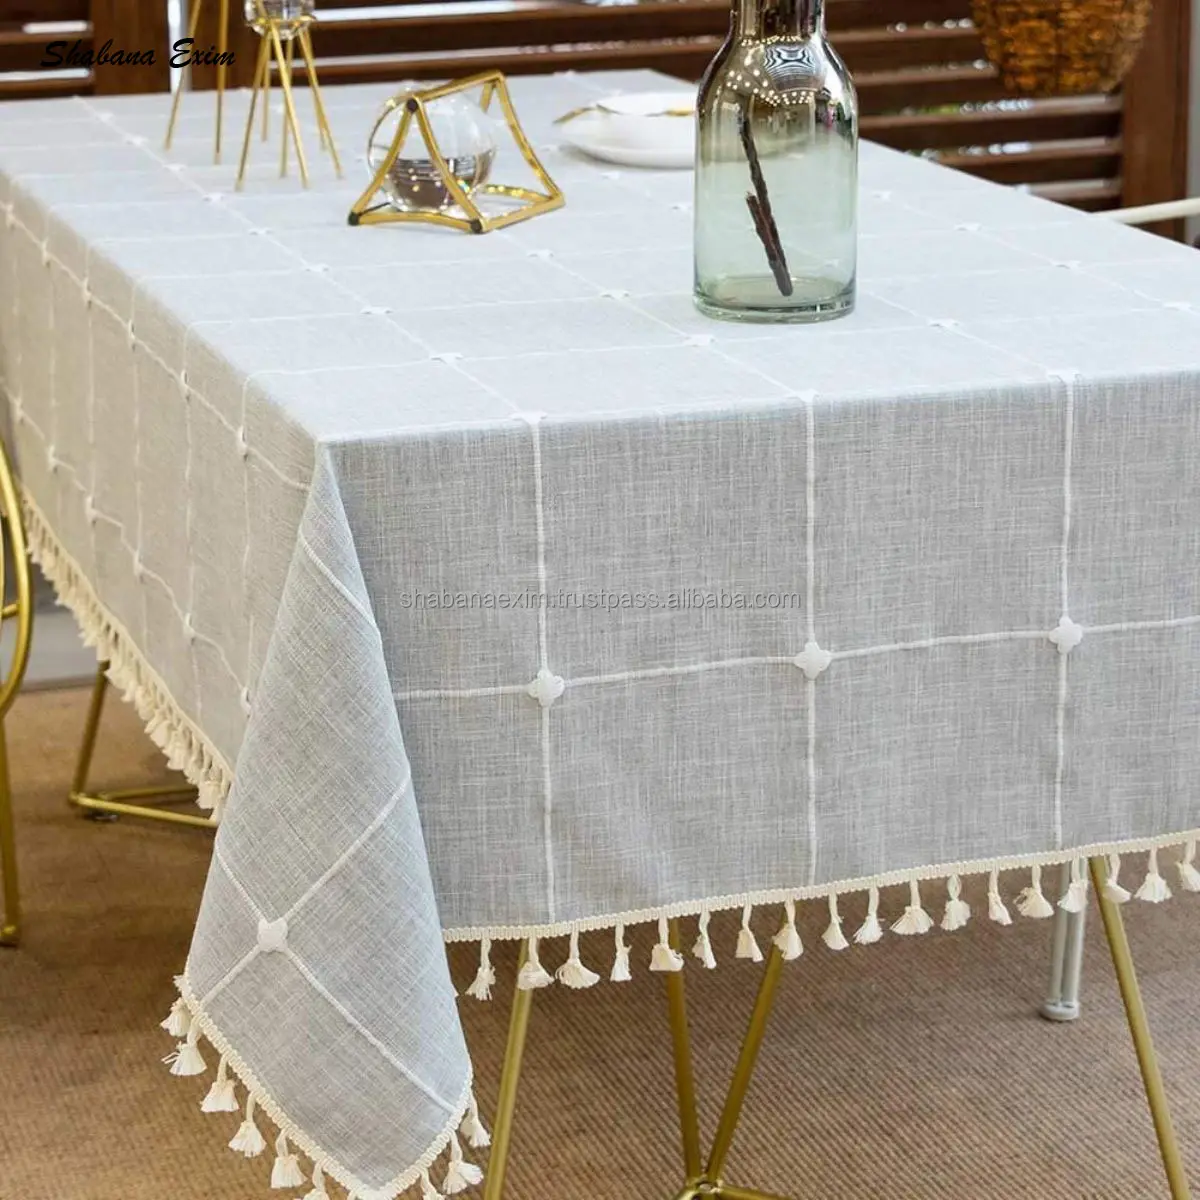 100% Cotton Restaurant Table Cloths with Tassel Lace for Home Decor Table Covers Party Wedding Tablecloth